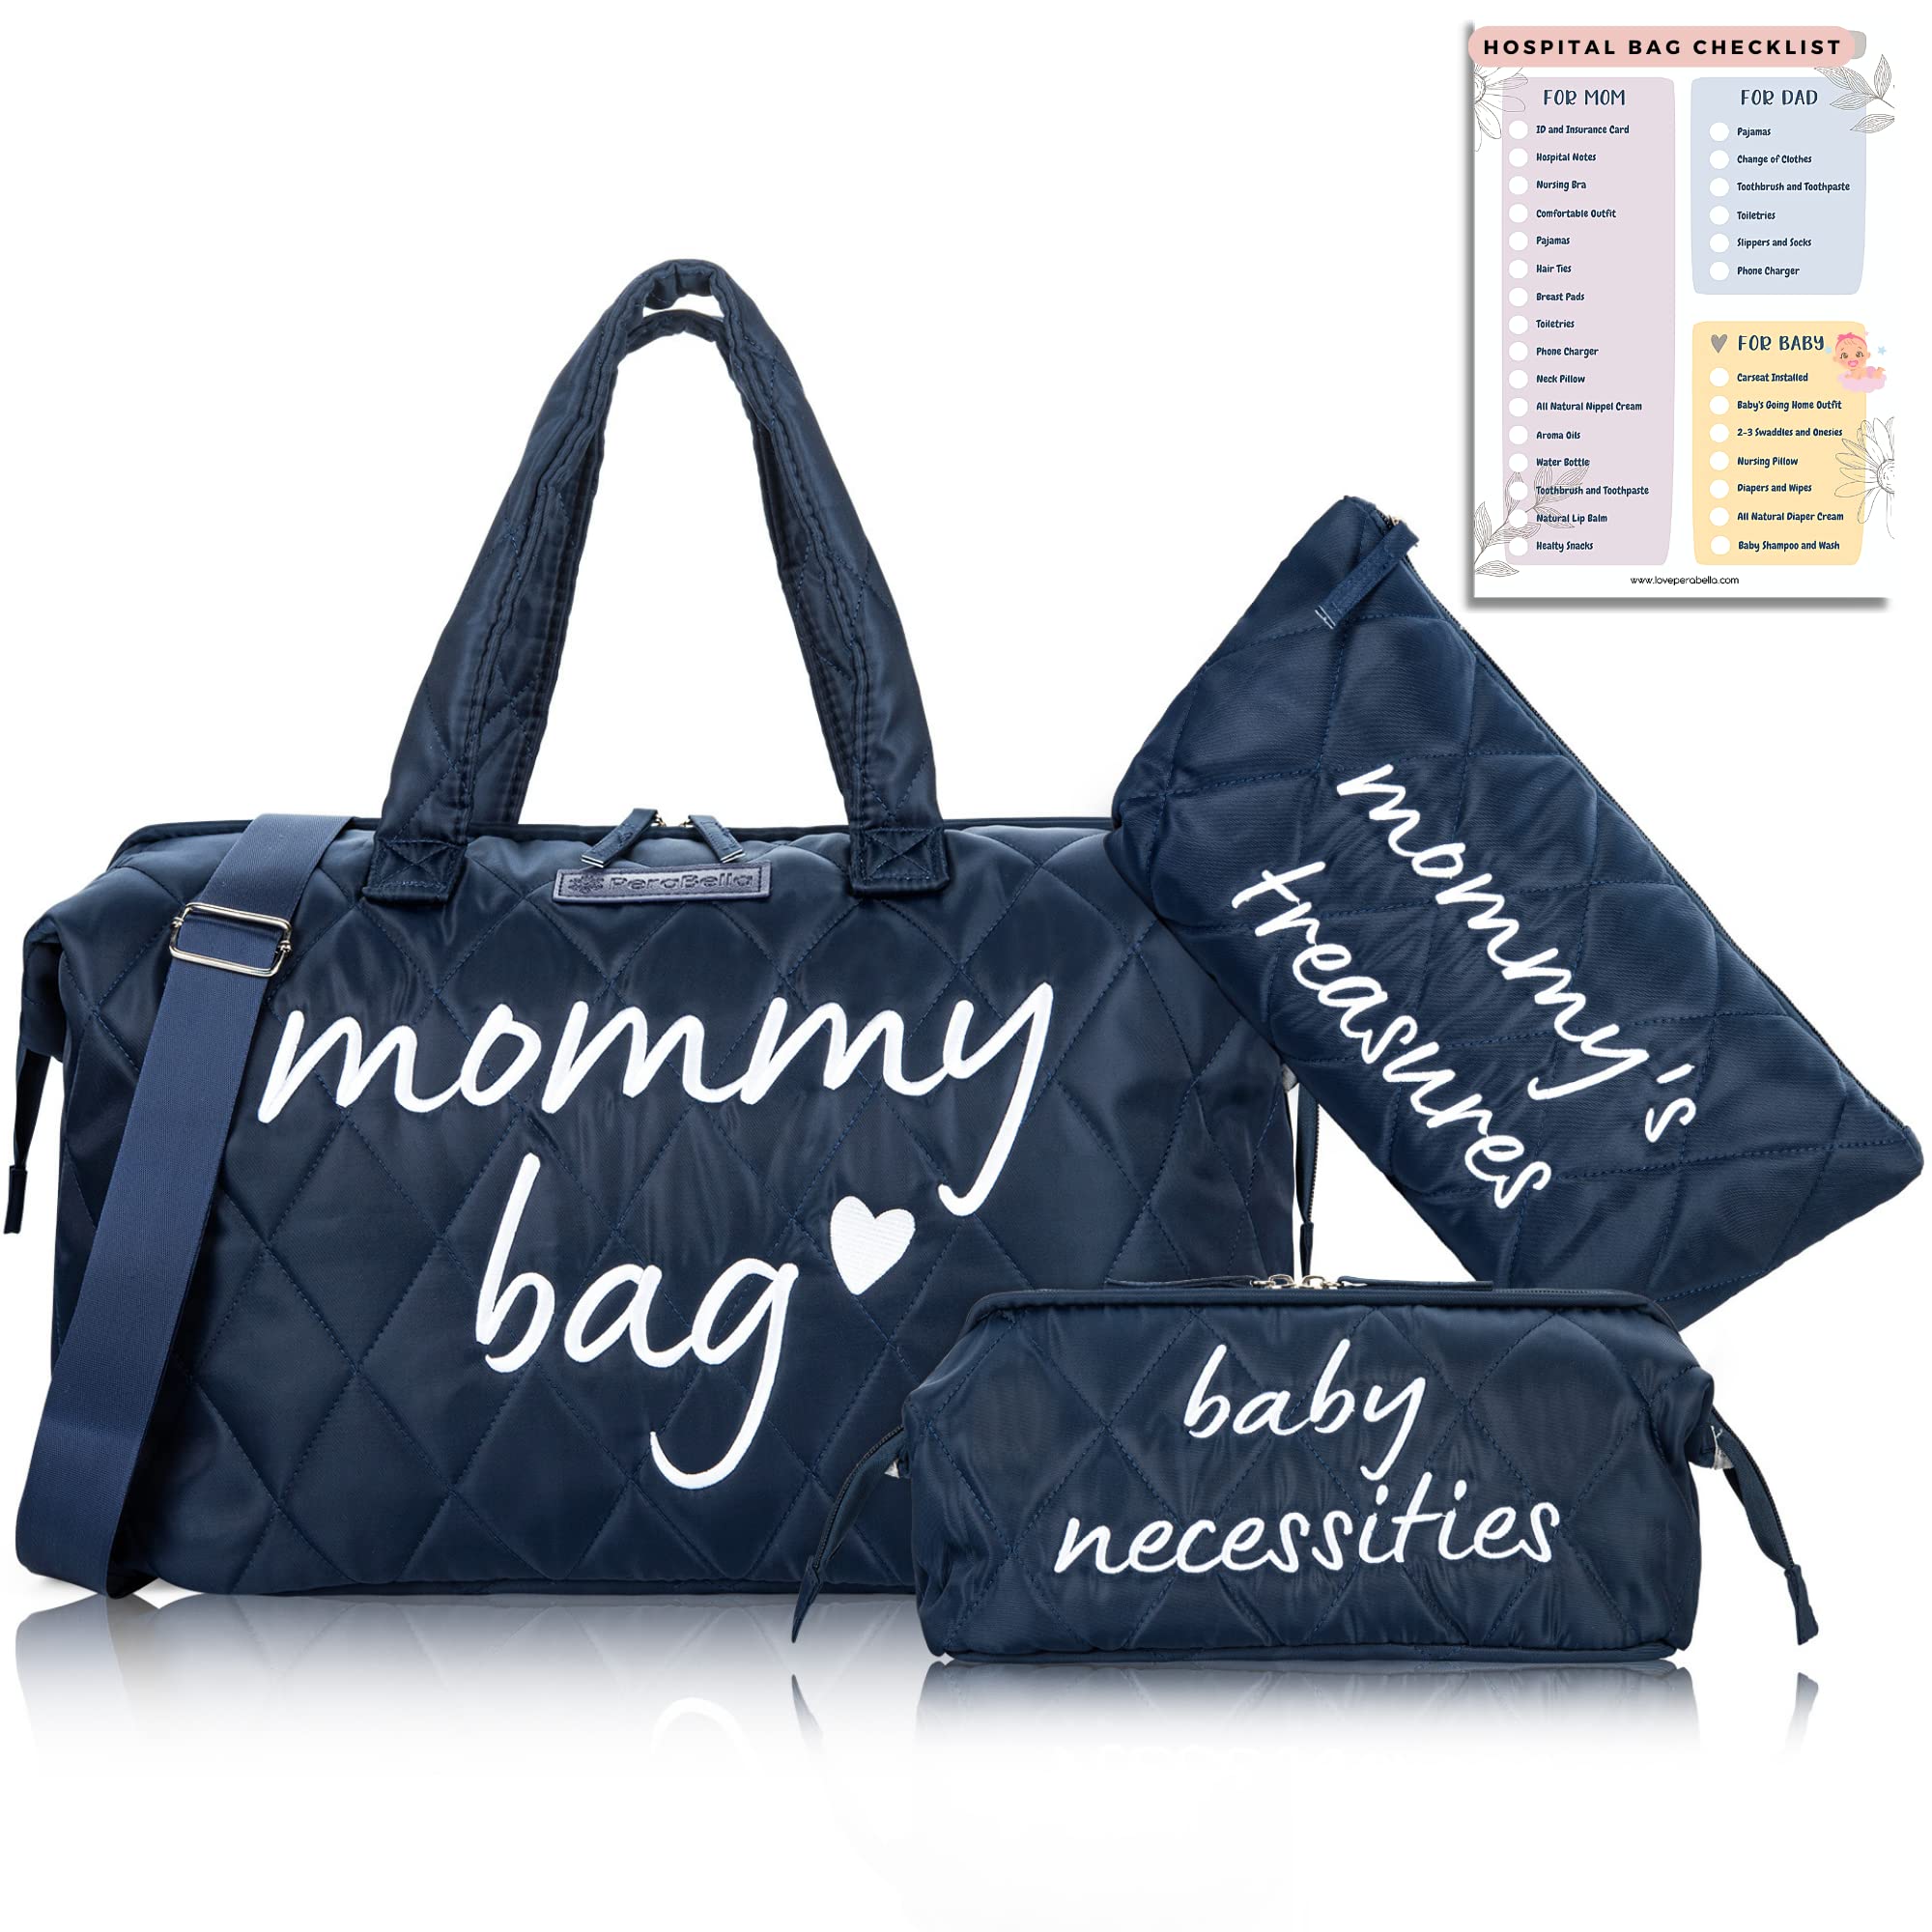 PeraBella Mommy Bag for Hospital, Mom Bag Diaper Bag Tote, Mommy Hospital Bag, Mom Hospital Bags for Labor and Delivery 